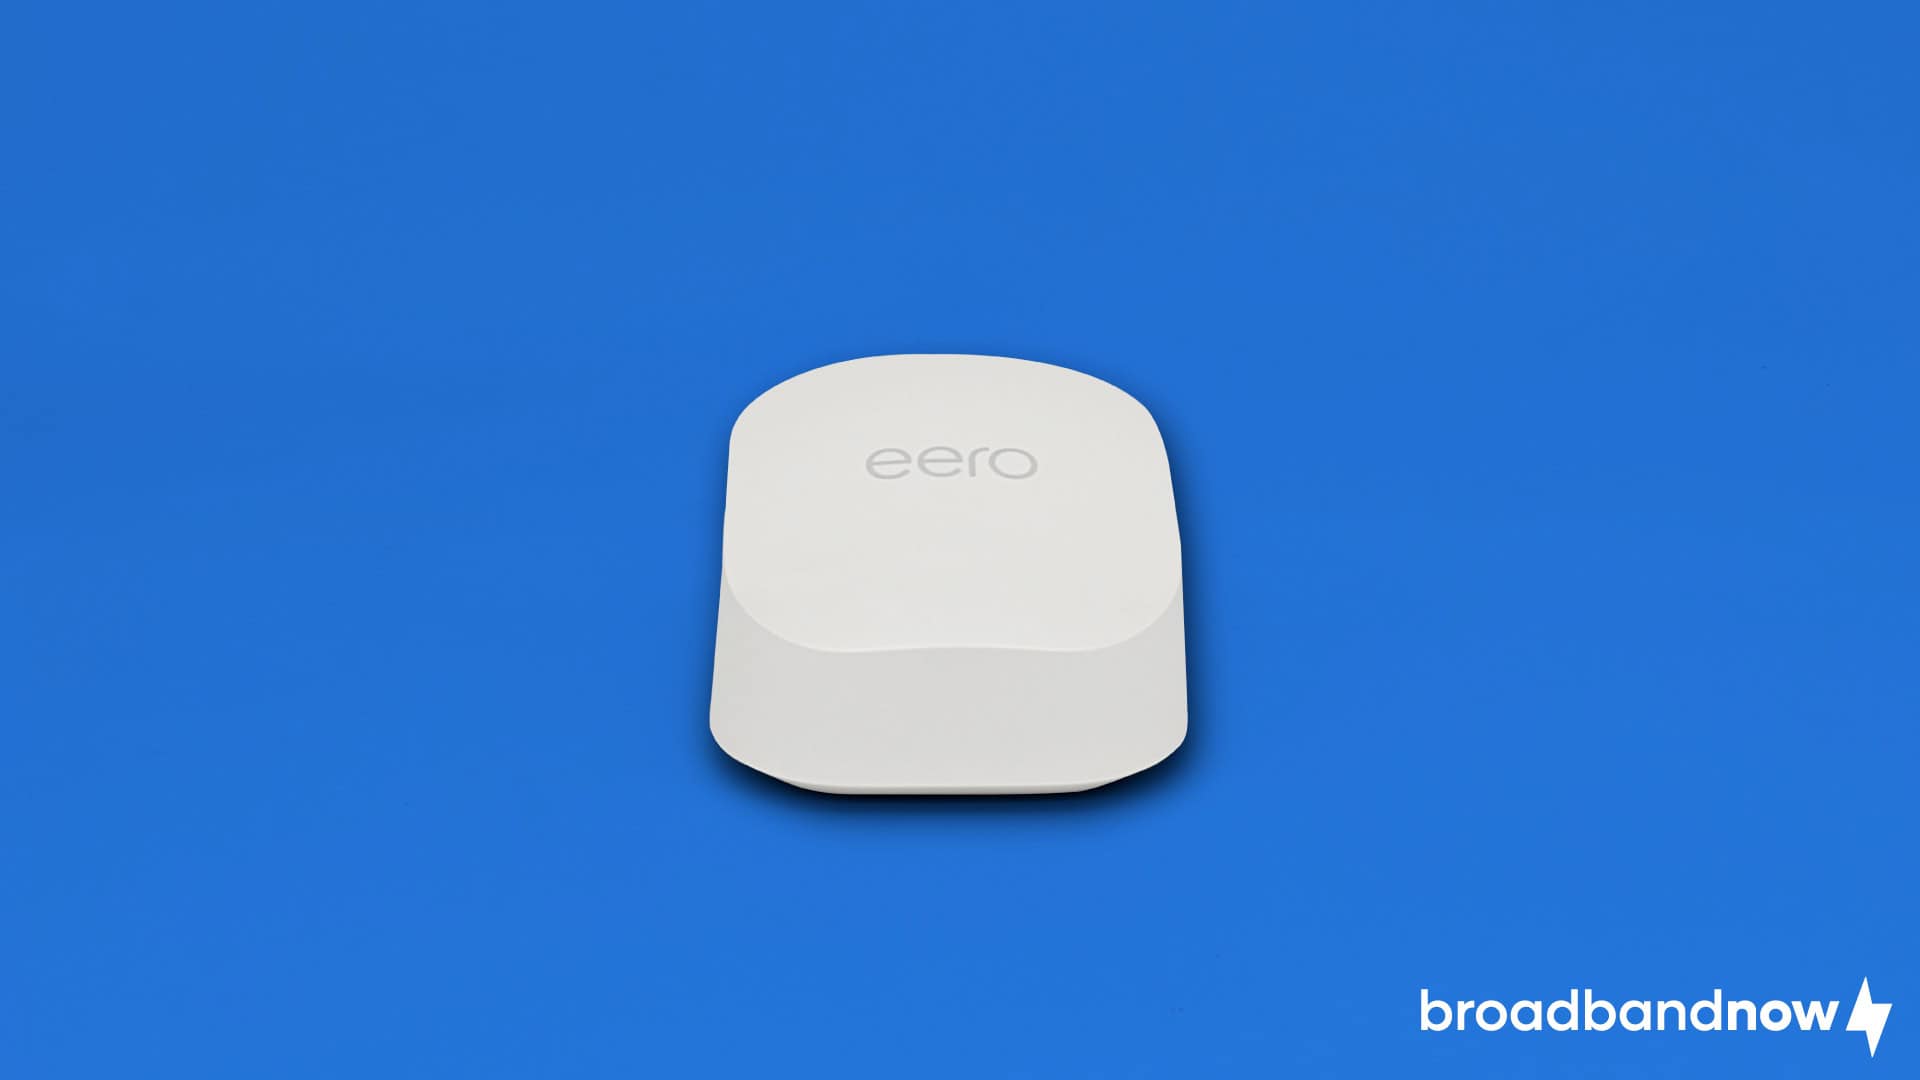 Photo of an Amazon eero 6+ Wi-Fi router on a blue background